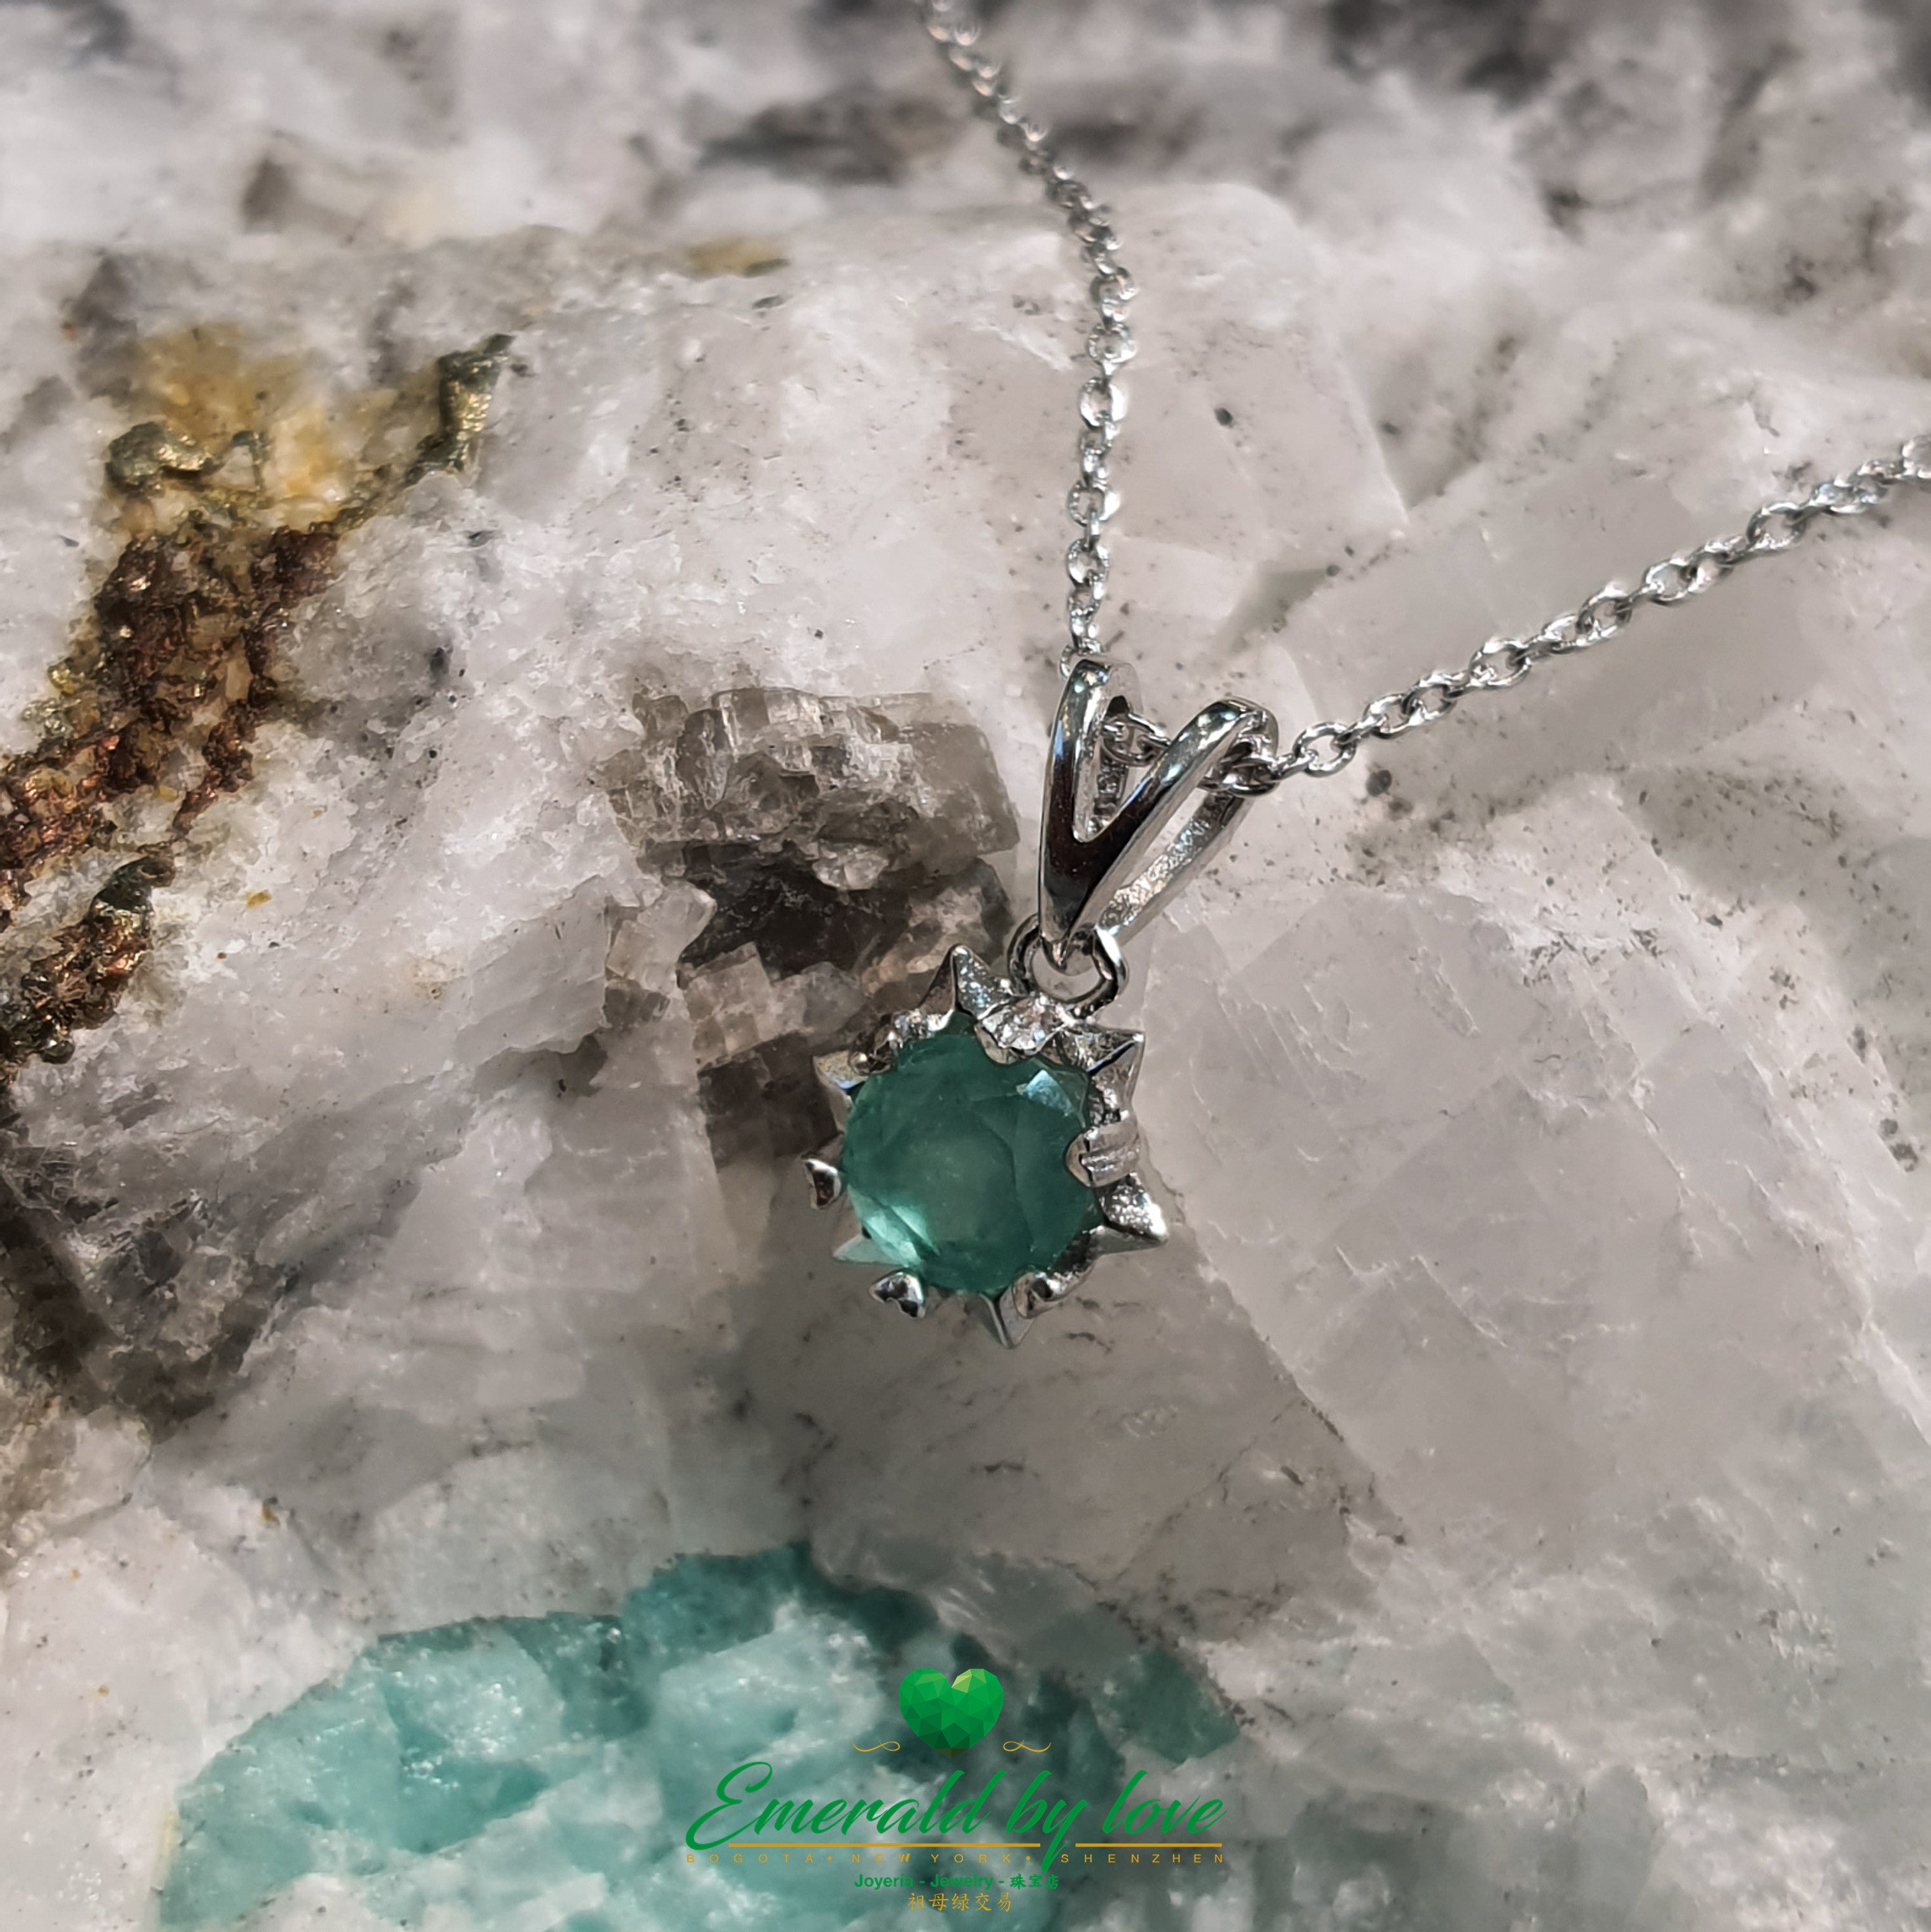 Crystal Emerald Pendant with Silver Spike Accents